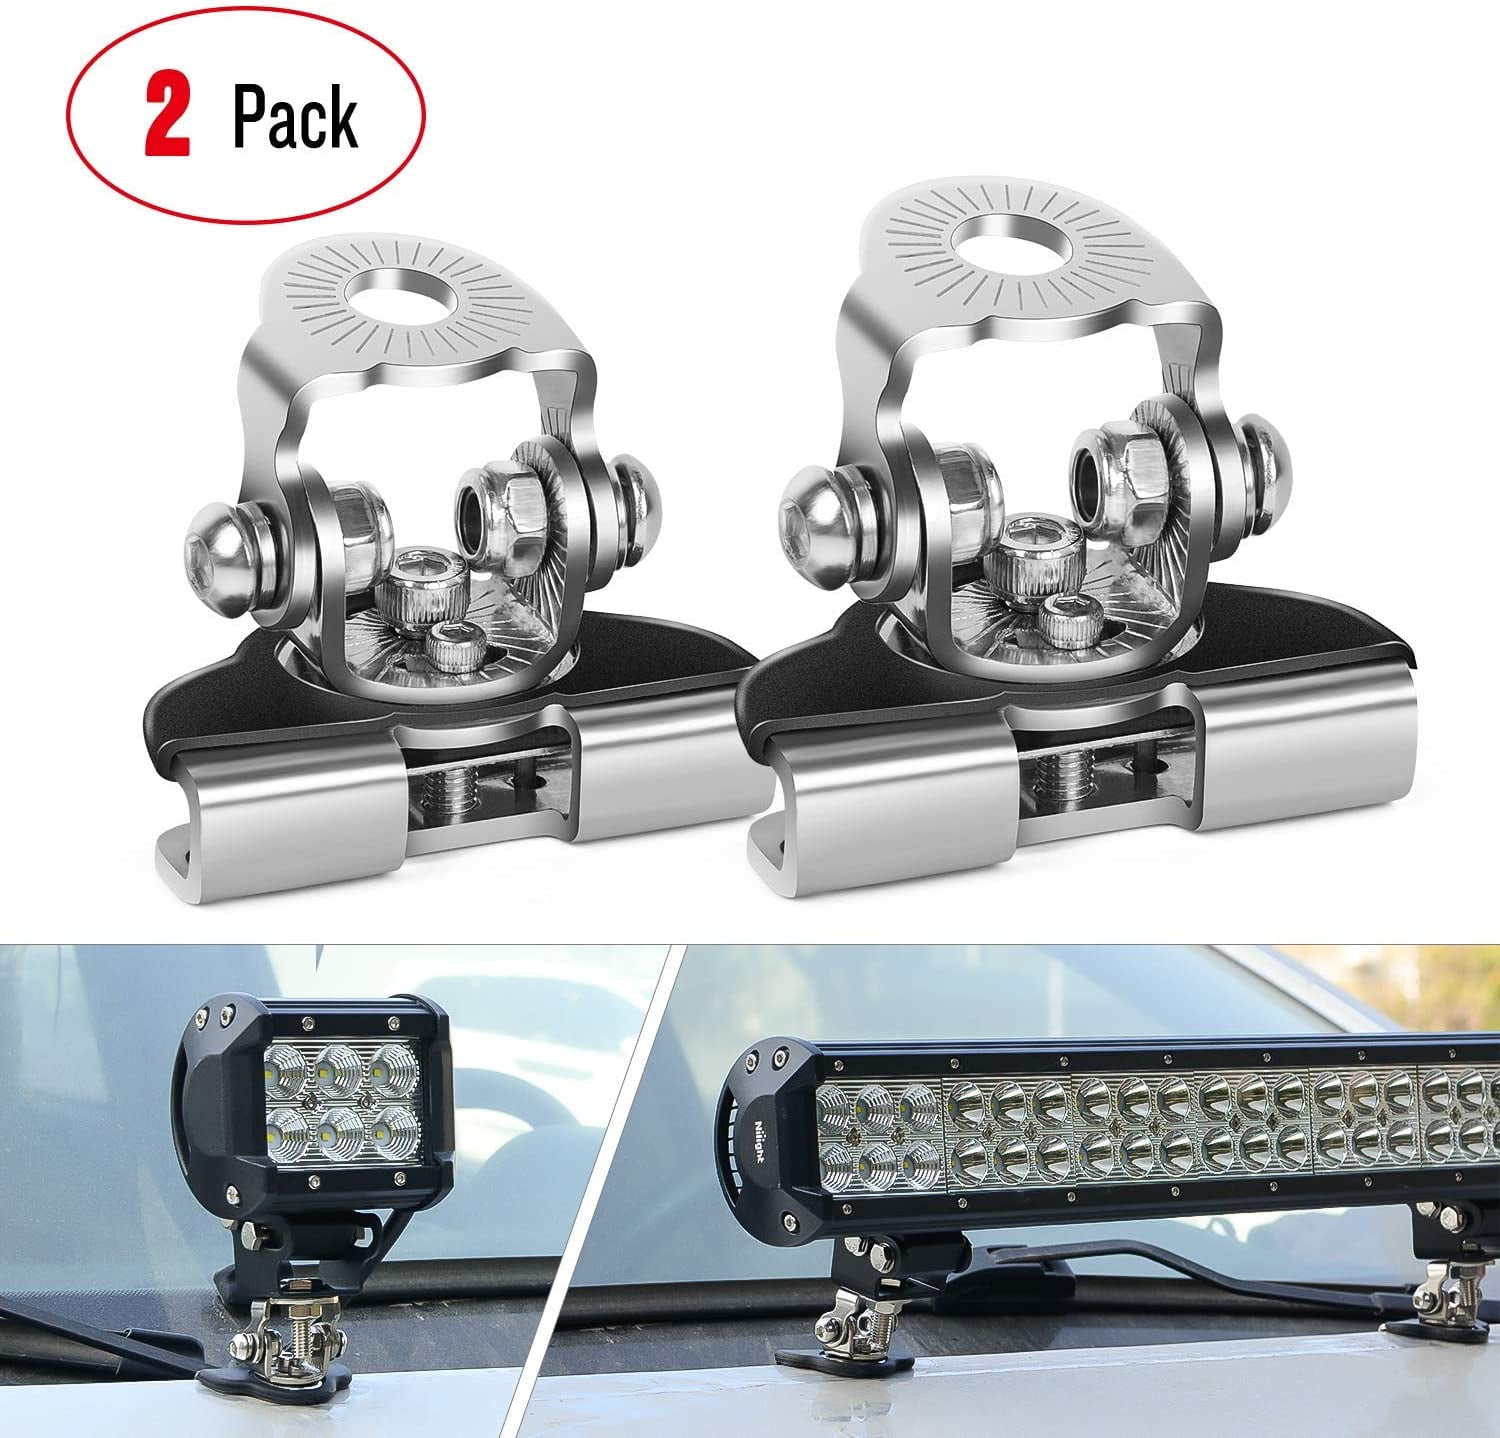 Universal LED Light Bar Mounting Brackets A Pillar Hood Work Light Clamp Holder Mount 304 Stainless Steel for Car Offroad Jeep Truck SUV 4x4 2PCS 